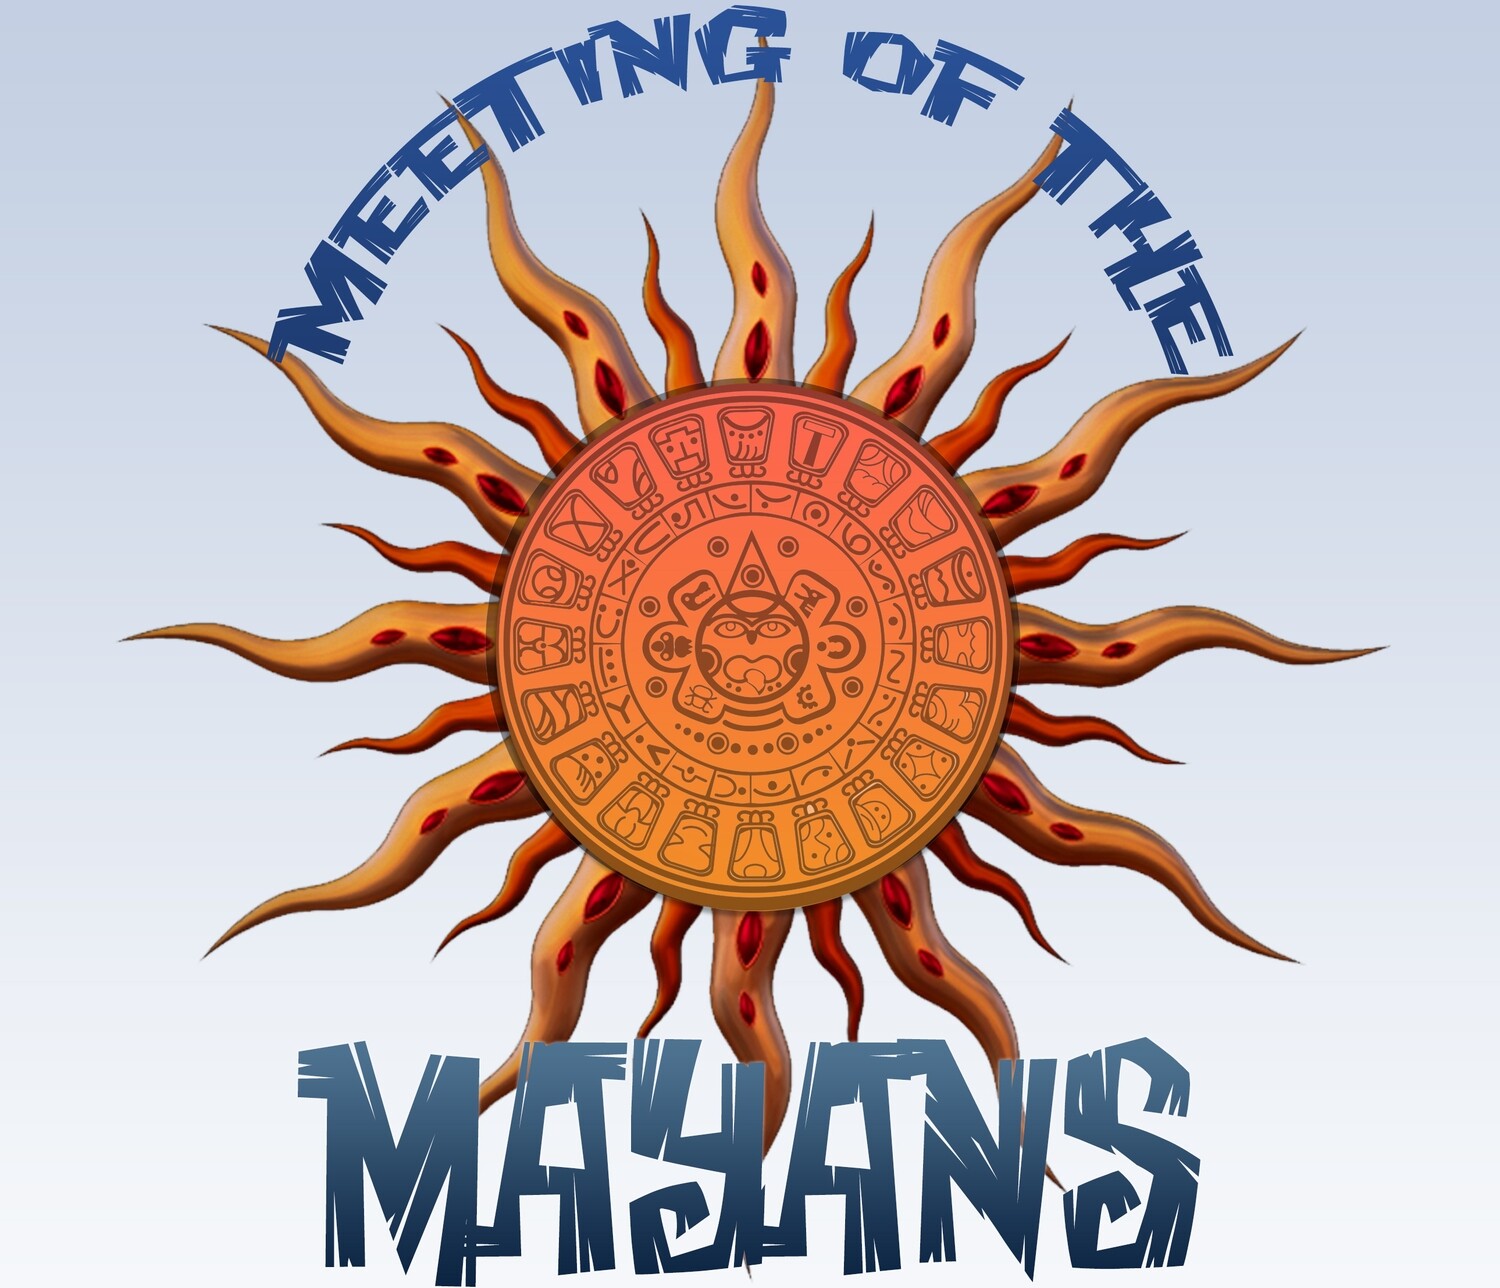 TICKETS: Meeting of the Mayans WEEK 3 Extension: Rio Celeste, Arenal, San Jose Costa Rica (ON SALE AUGUST 2022)